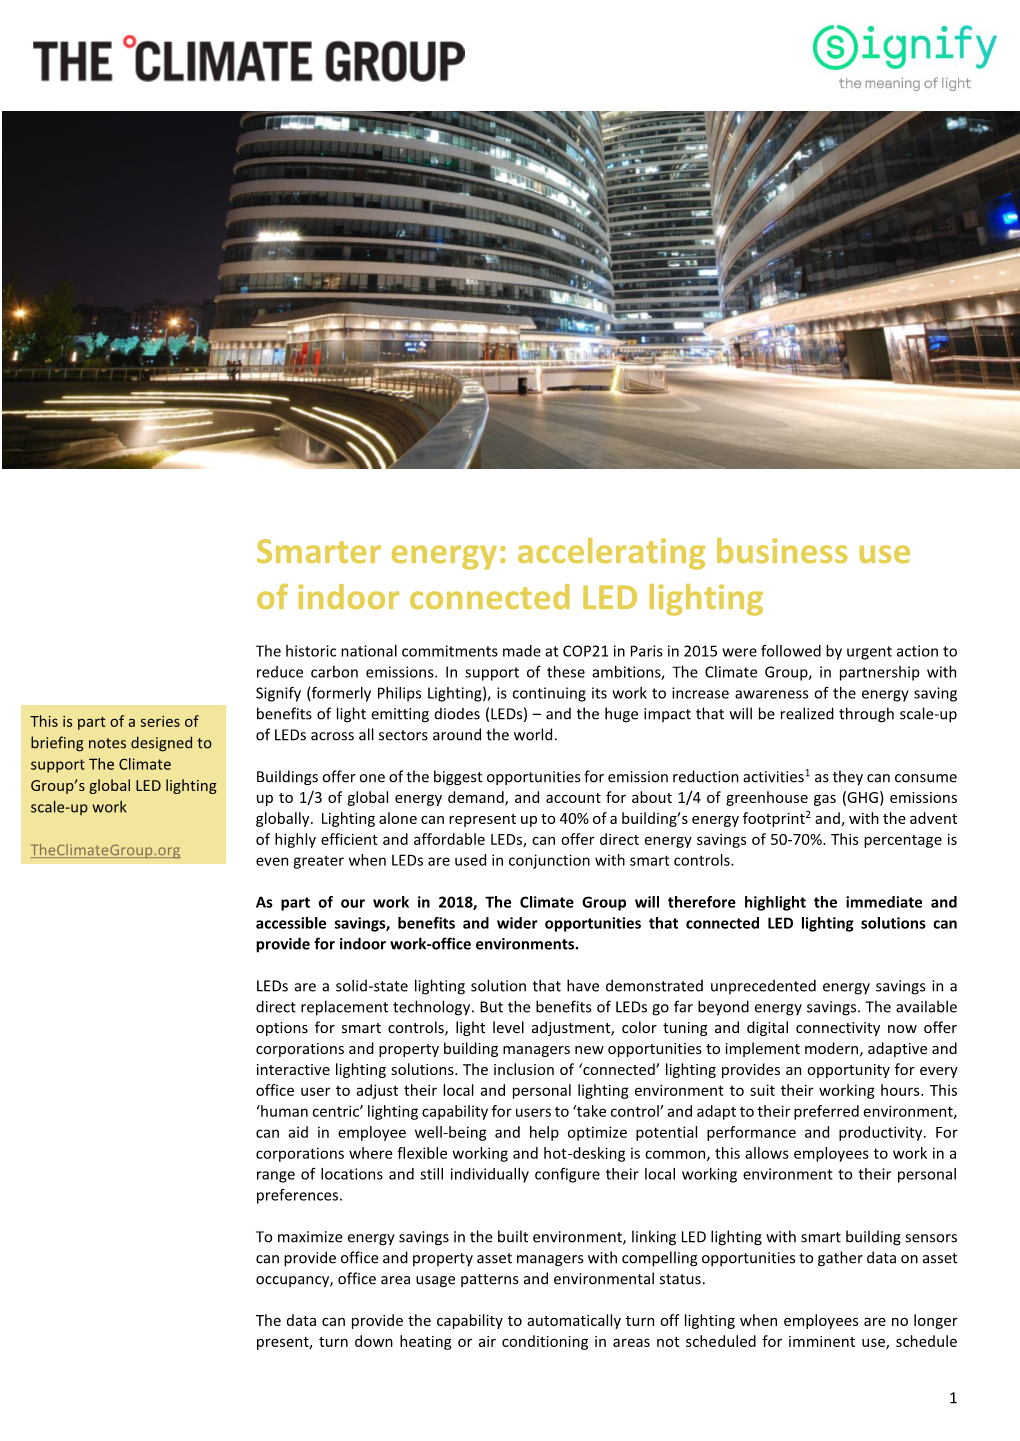 Smarter Energy: Accelerating Business Use of Indoor Connected LED Lighting